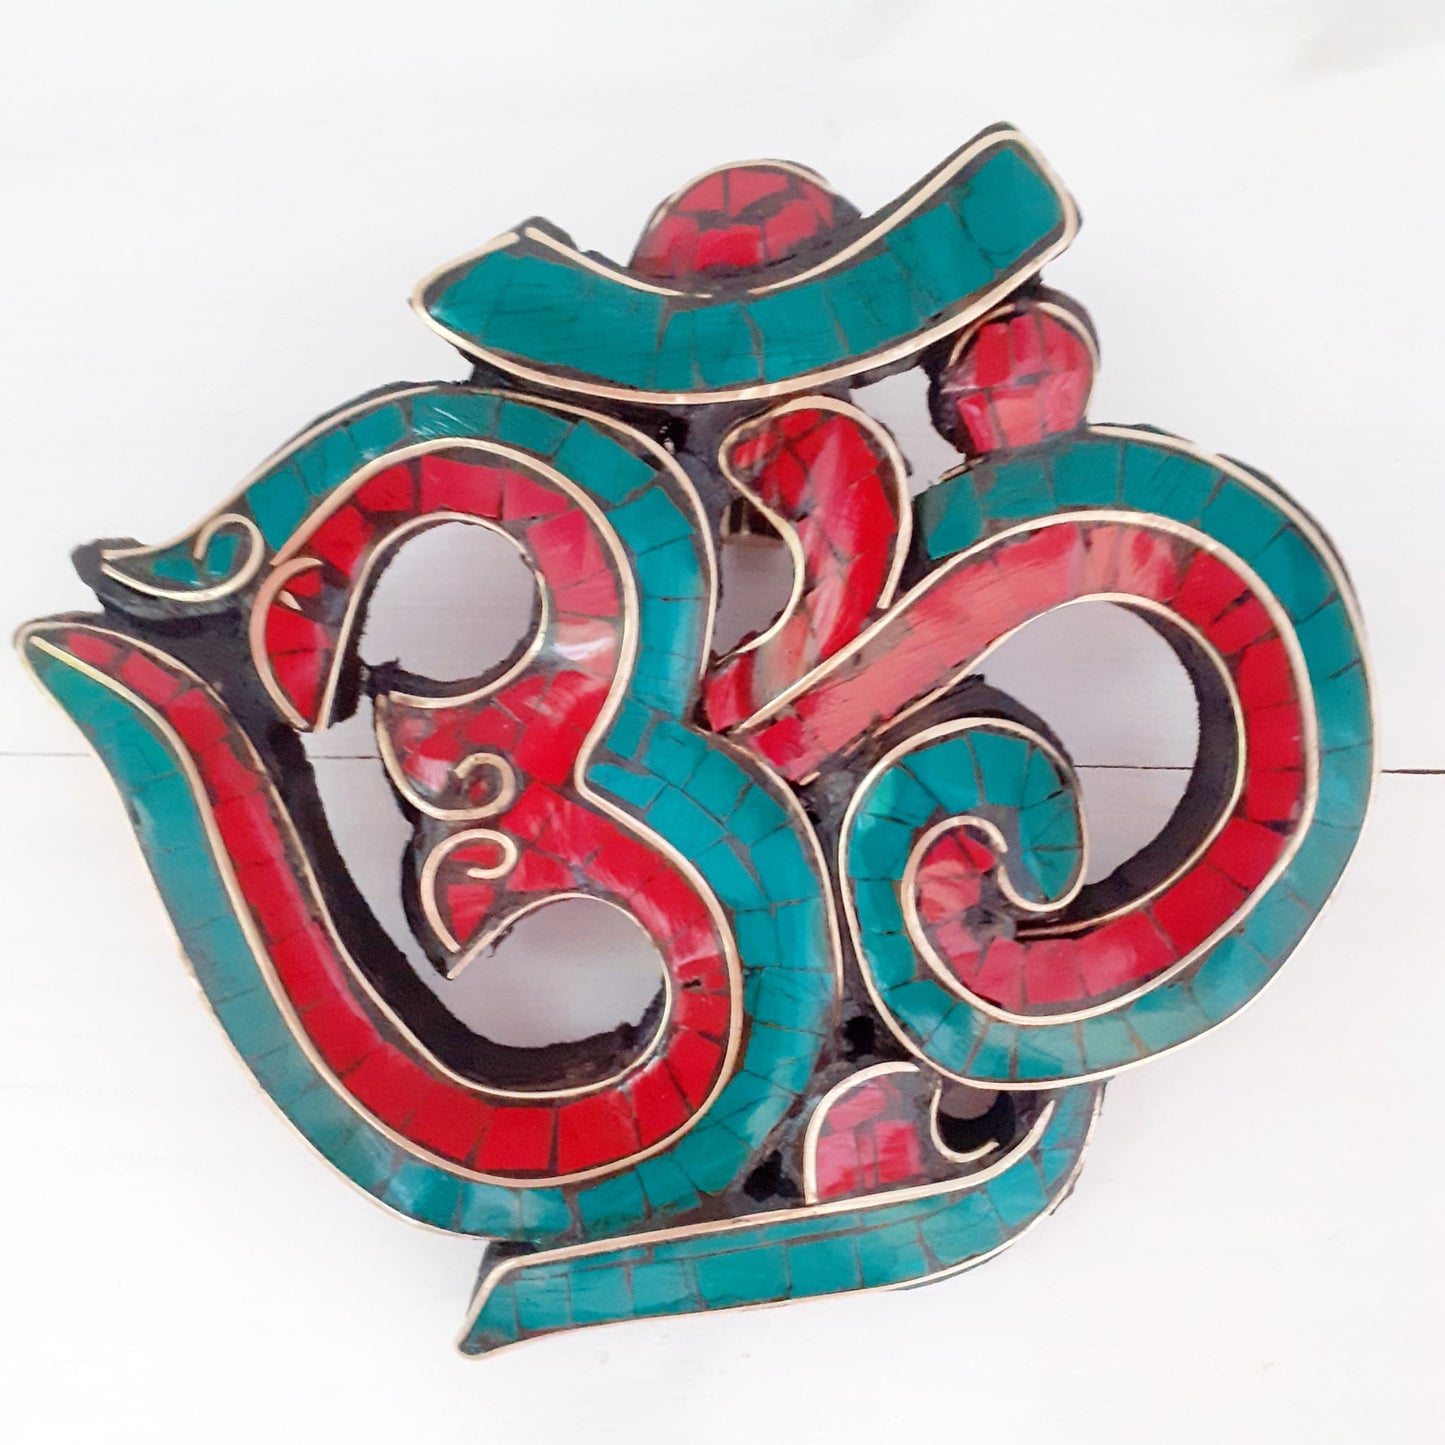 Turquoise Wooden Ganesh Om wall hanging 10 cm x 11 cm